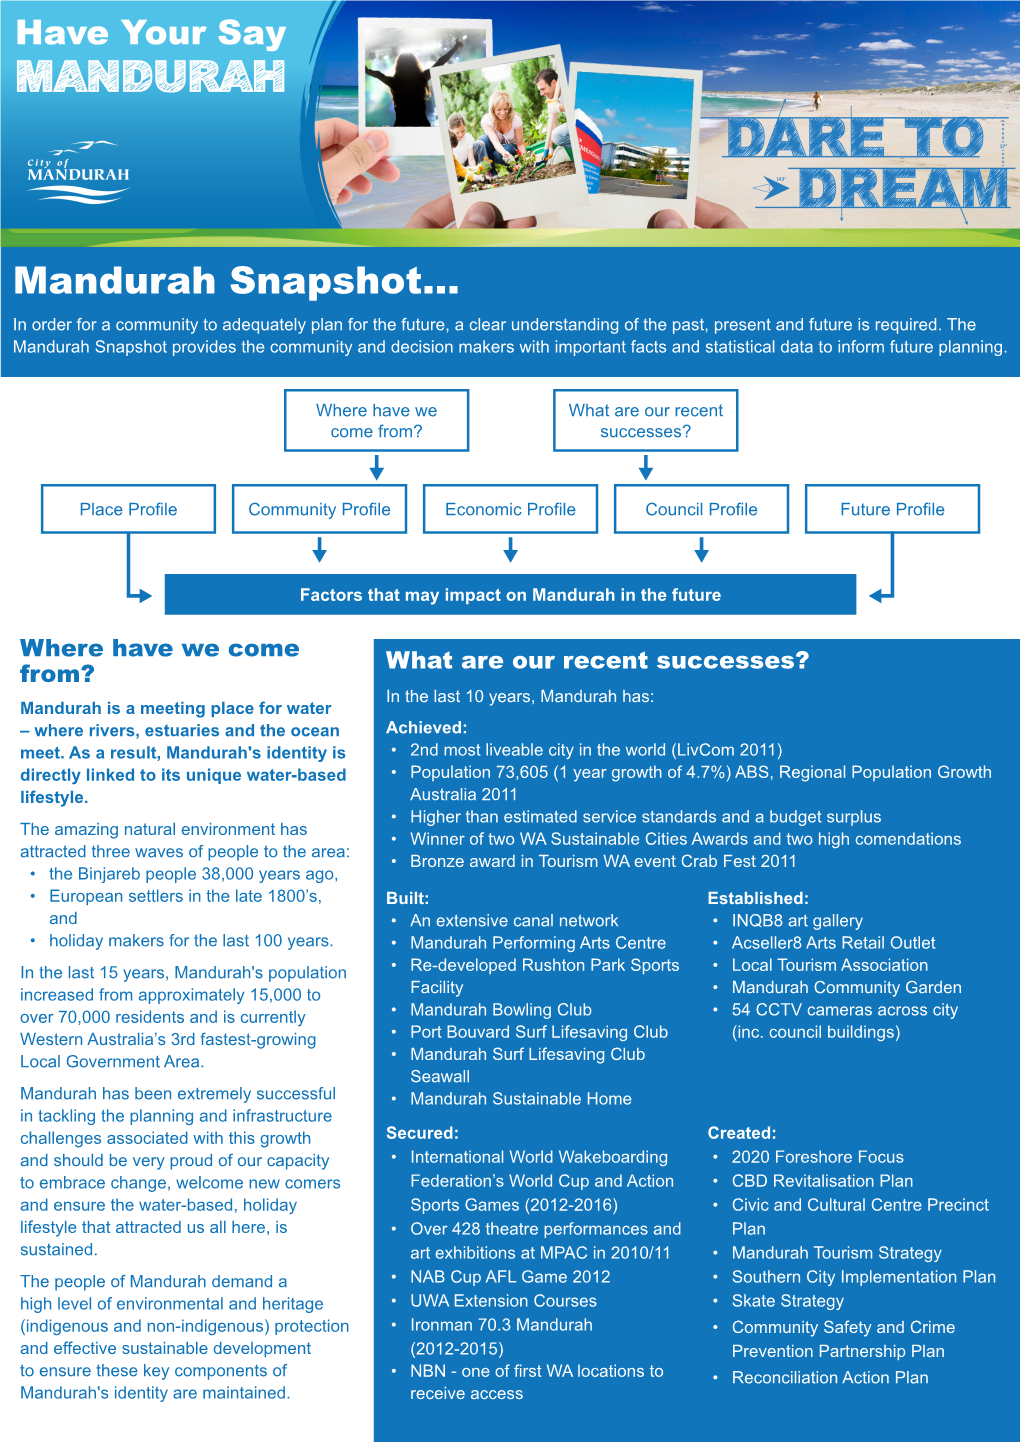 Mandurah Snapshot... in Order for a Community to Adequately Plan for the Future, a Clear Understanding of the Past, Present and Future Is Required